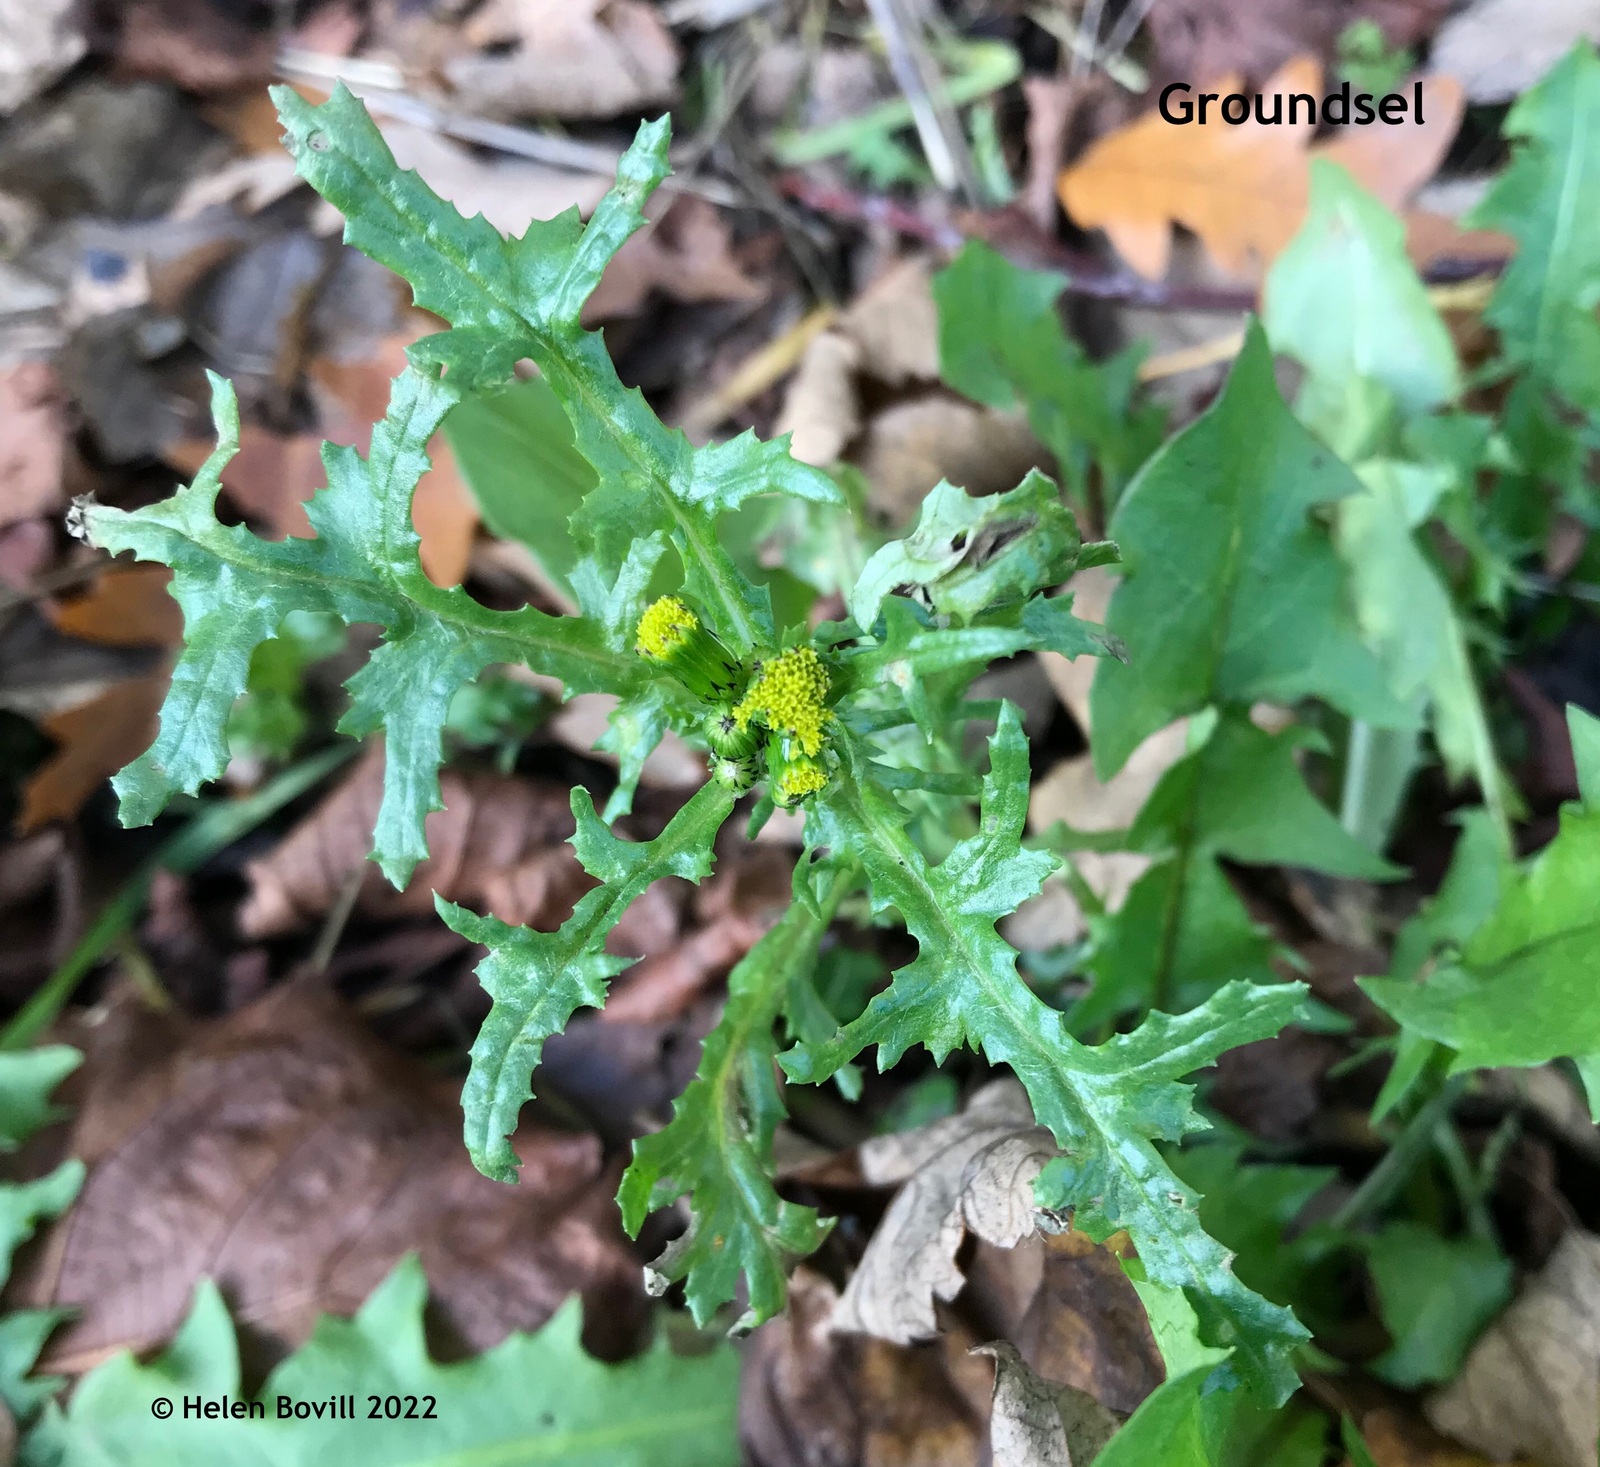 The tiny yellow flowers of Groundsel